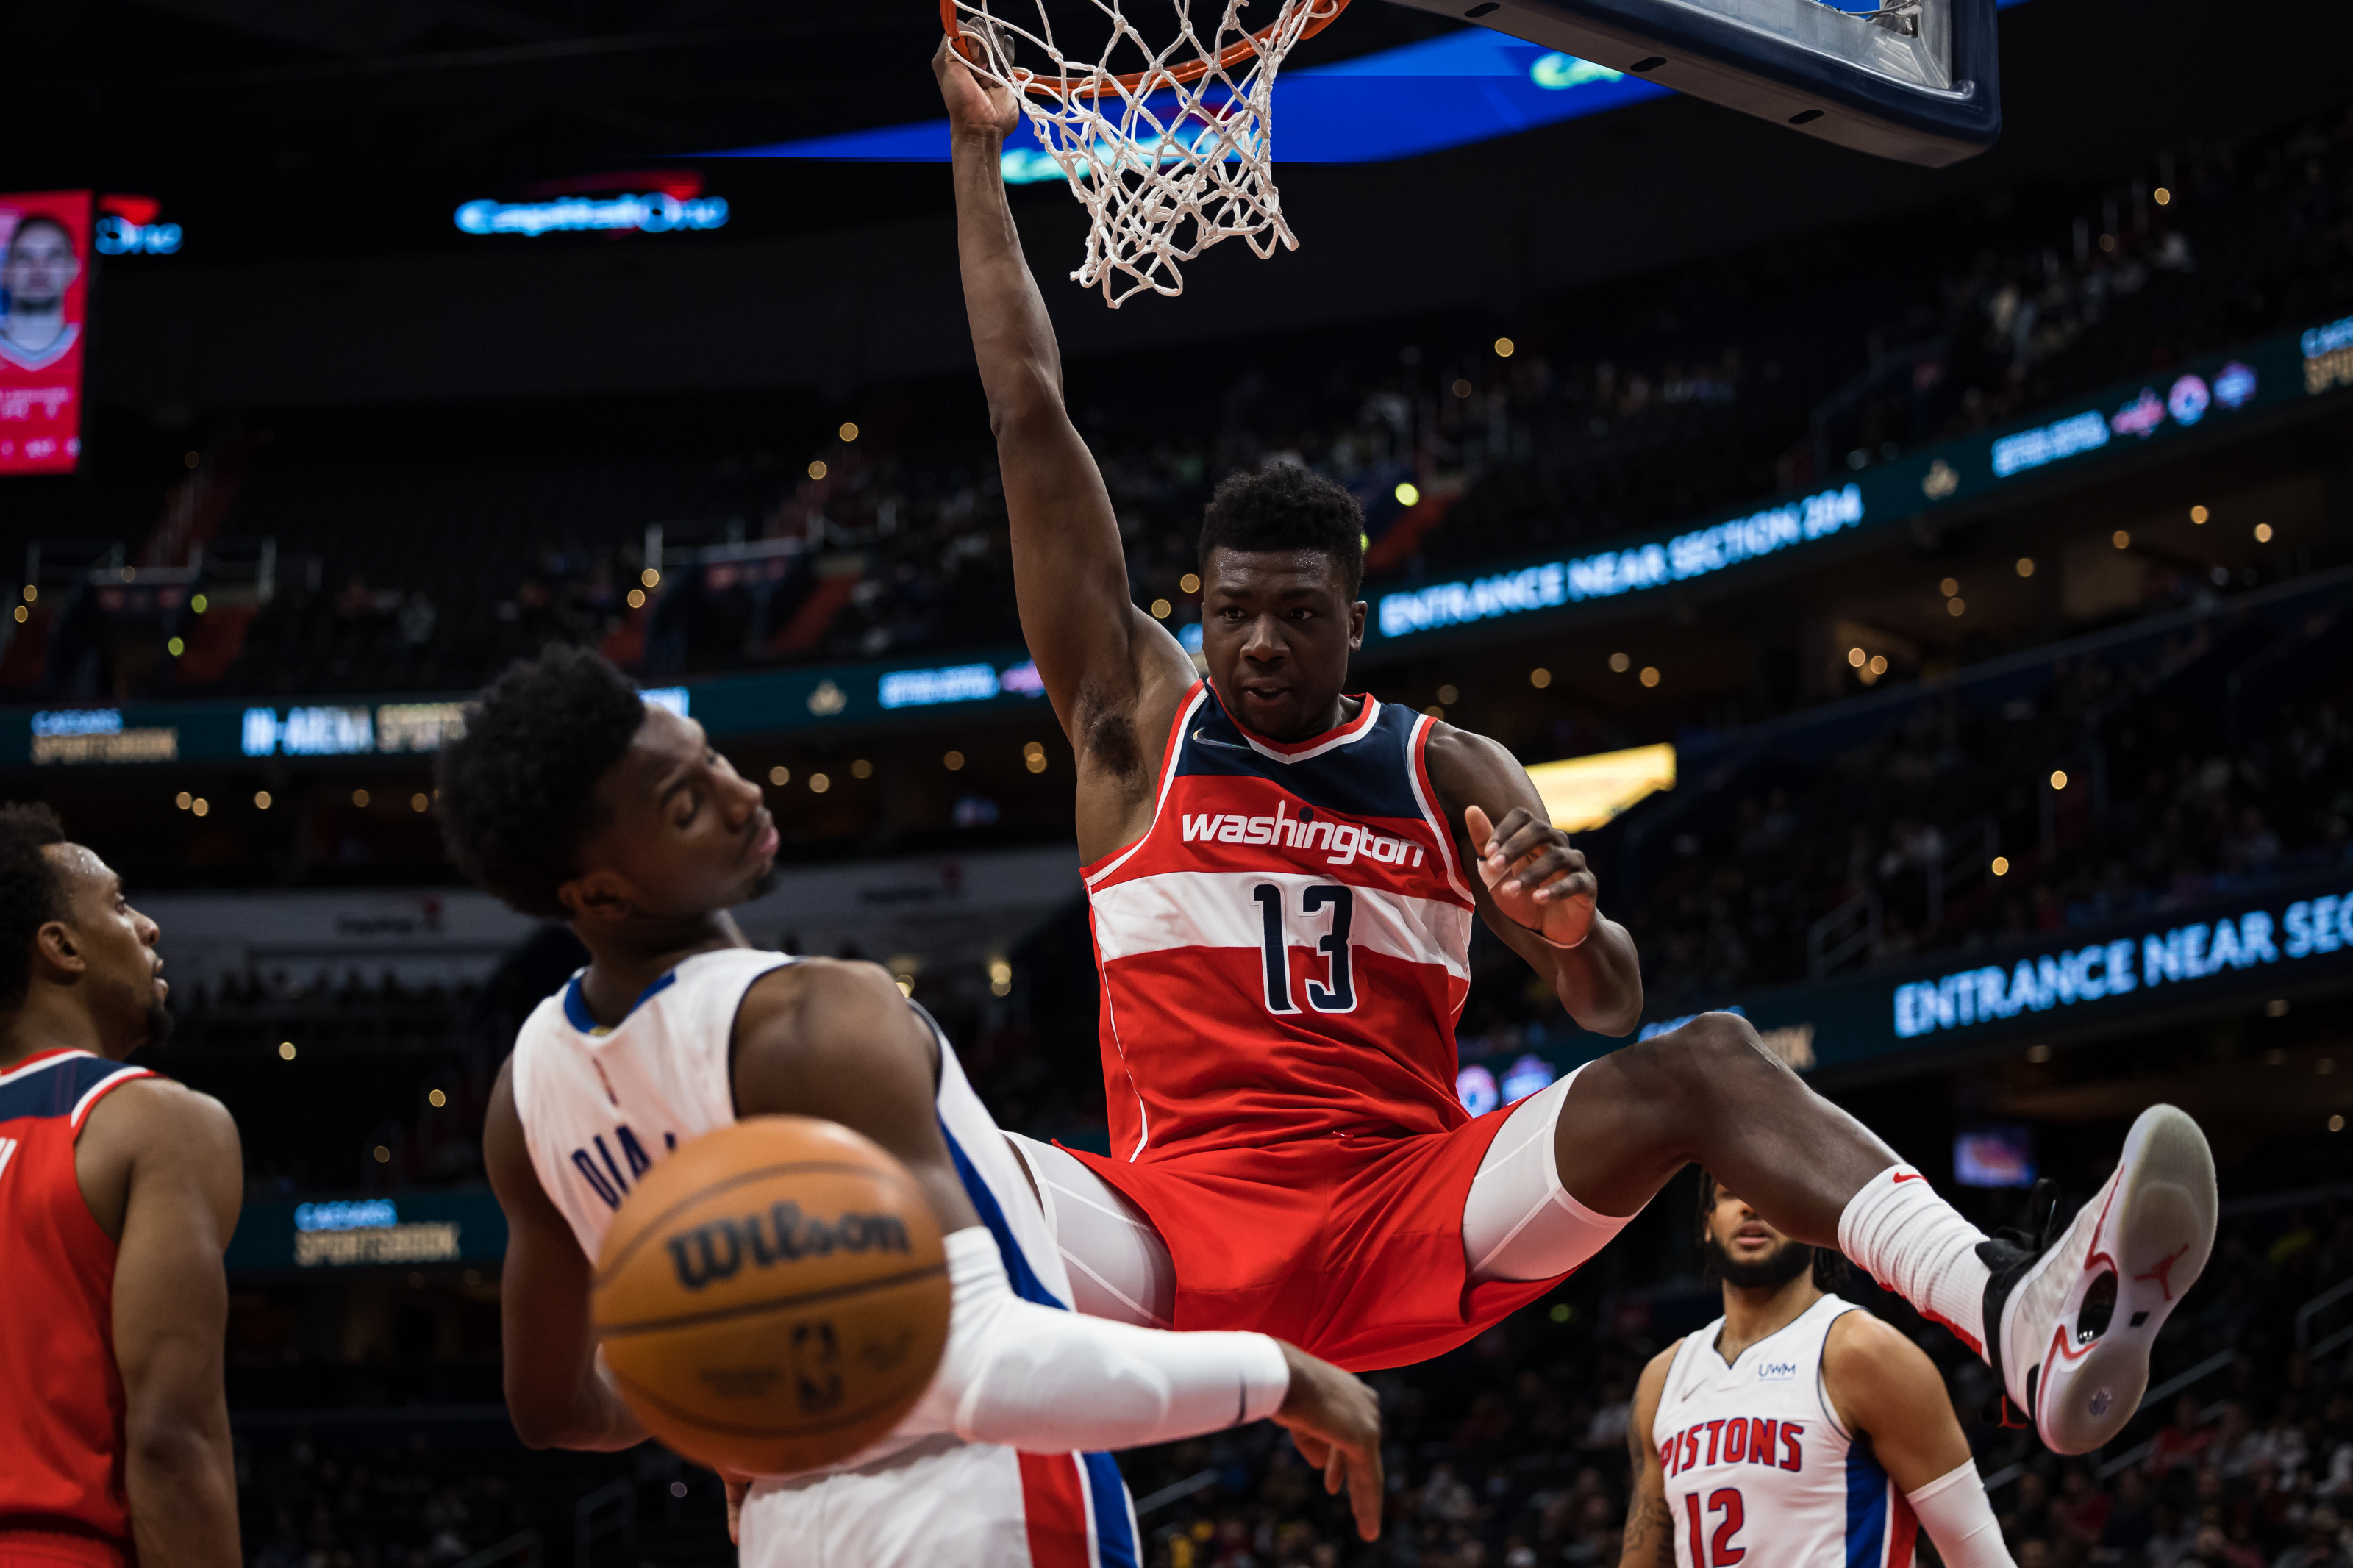 Wizards claim Thomas Bryant off waivers